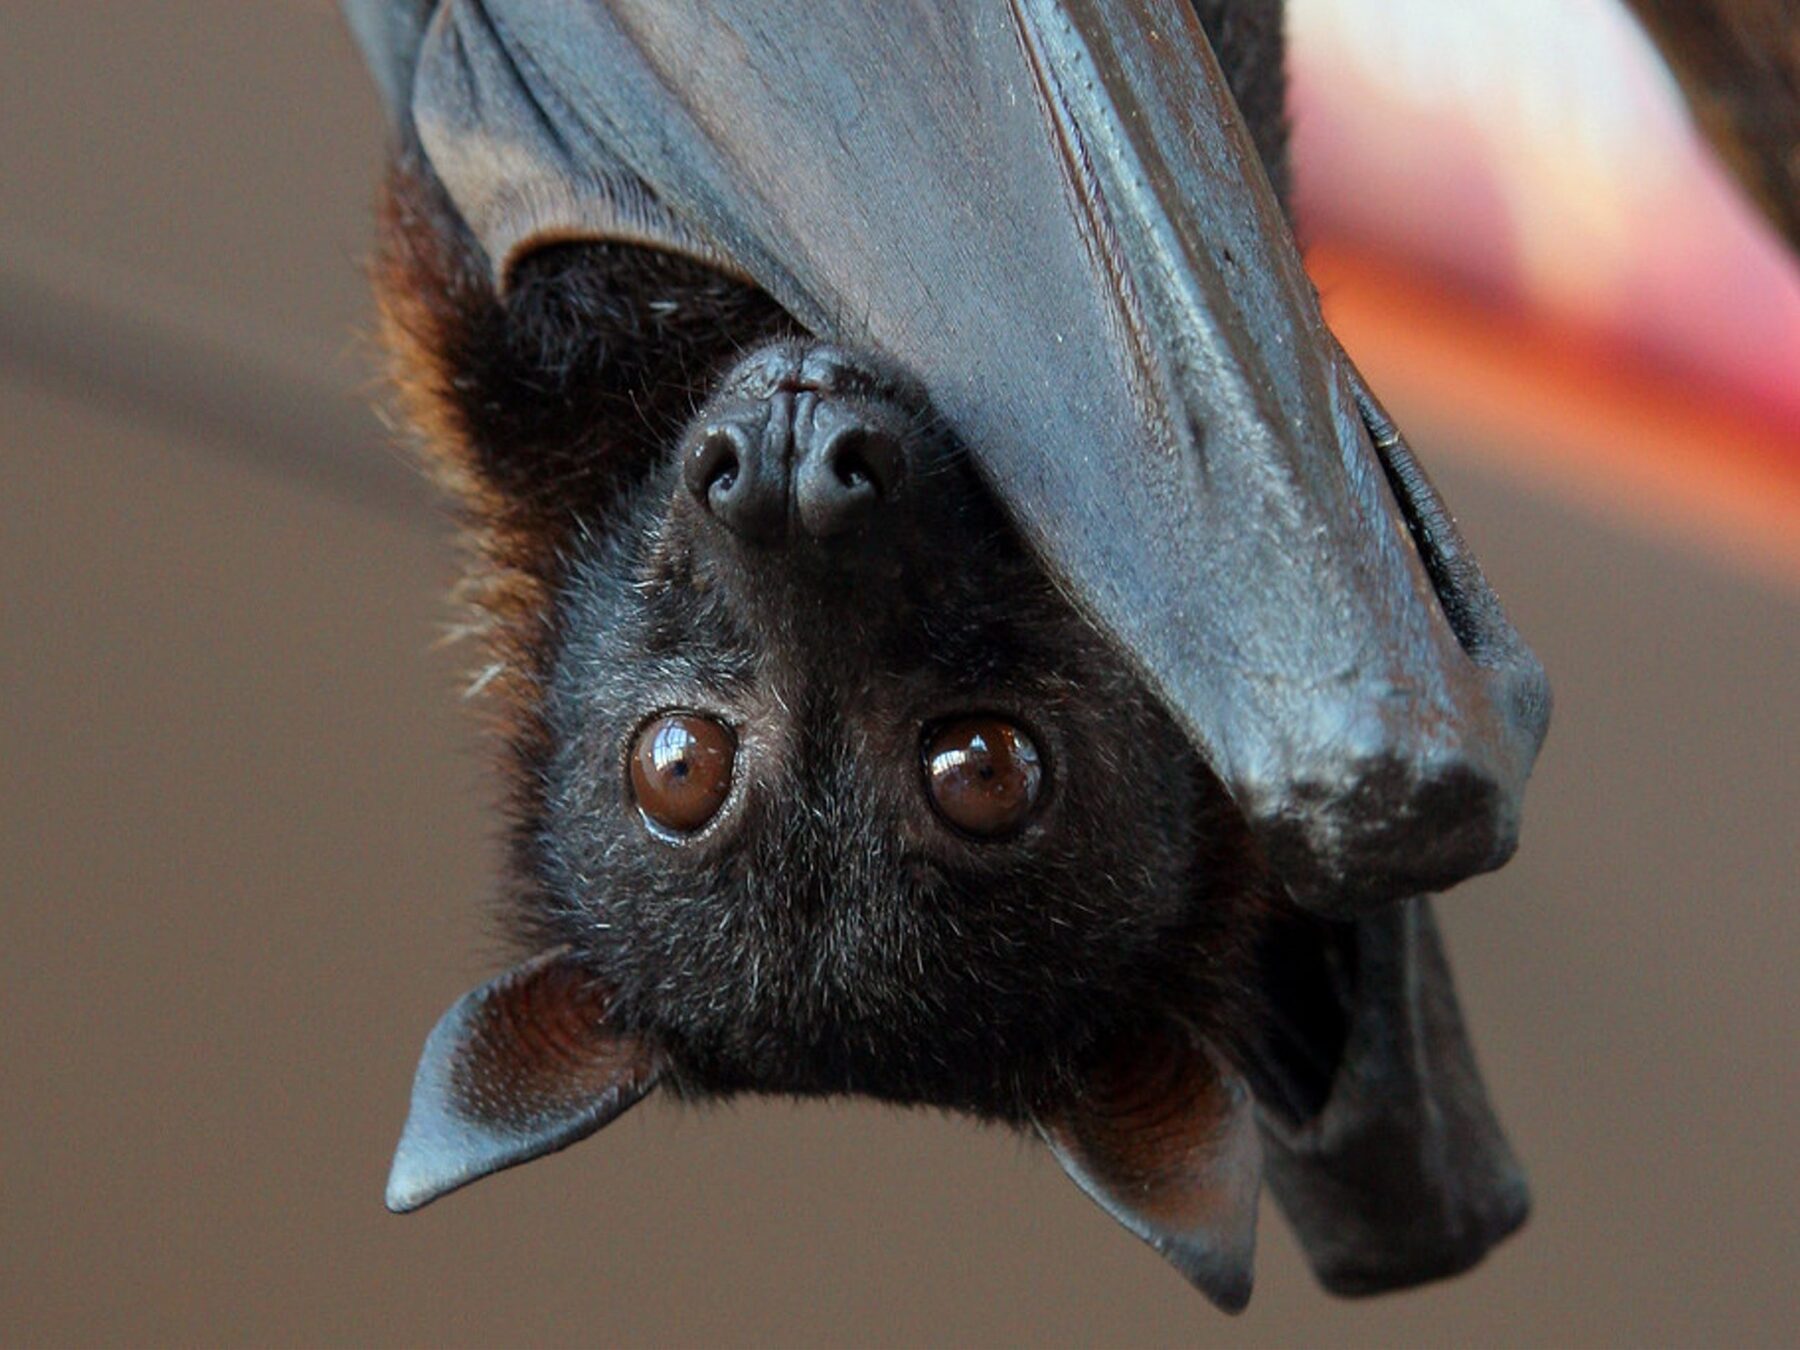 8 Facts About International Bat Appreciation Day (April 17th) 